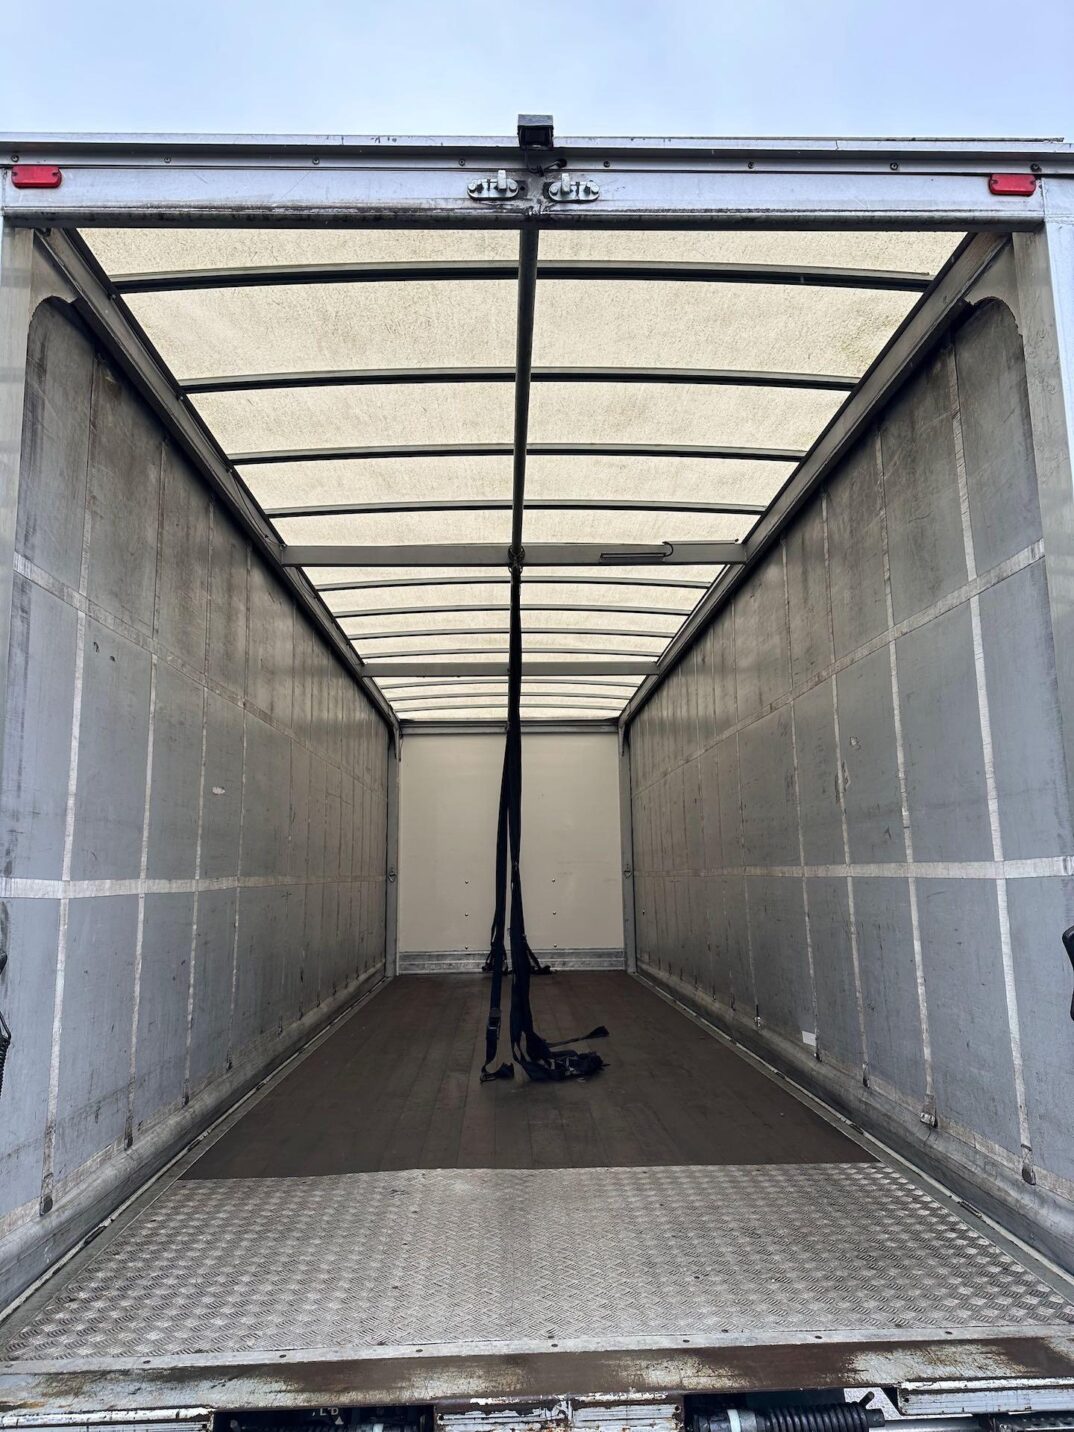 2018 18 Iveco Eurocargo 180E25S 18T – 28′ Curtain & Tail  Curtain Side Ref No: GK18 EOE full